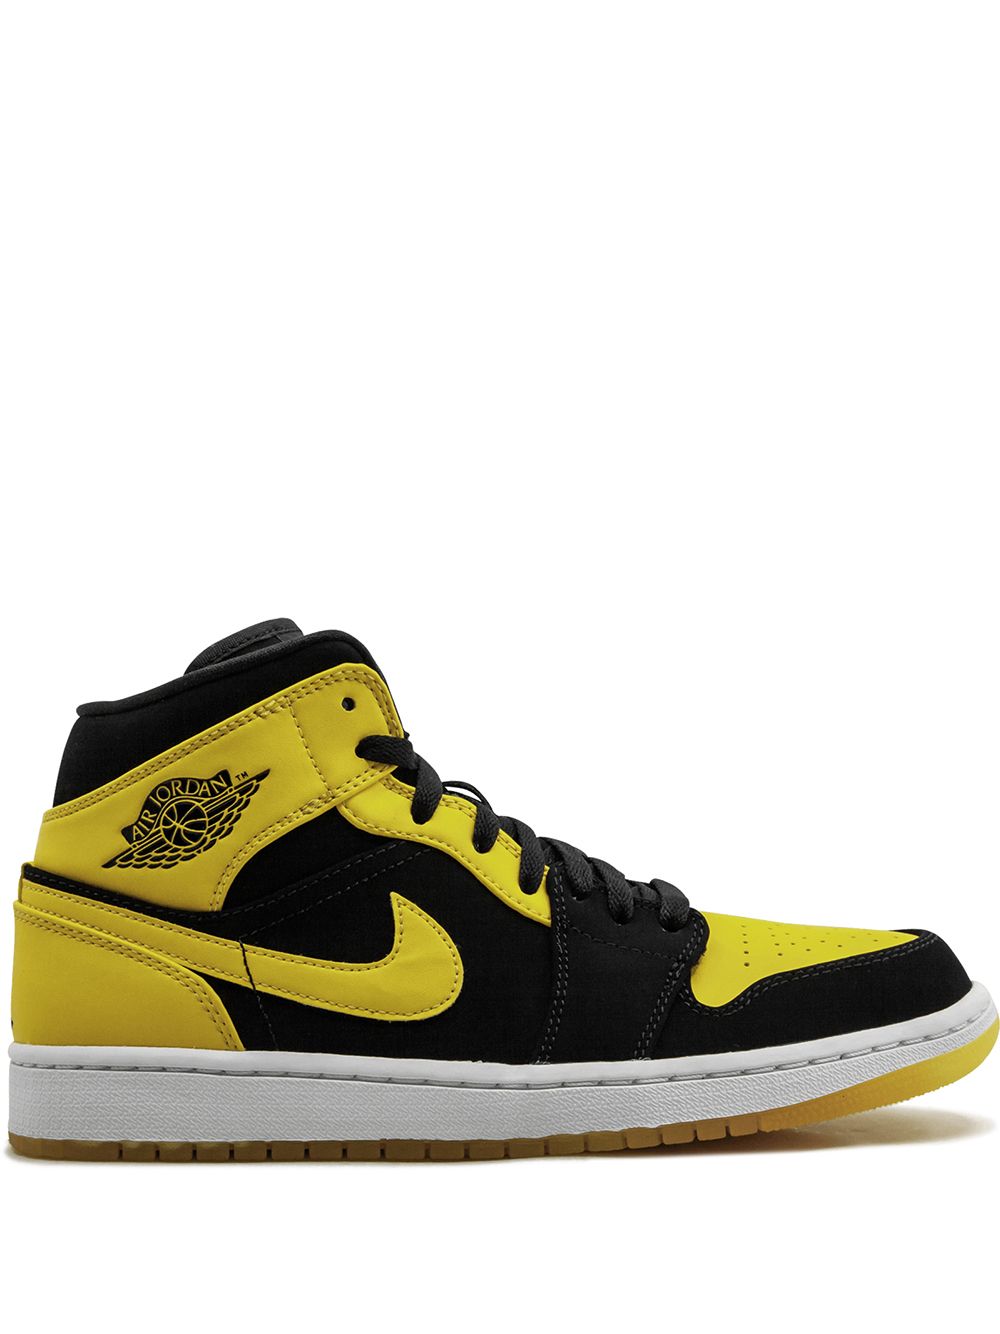 the new yellow and black jordans